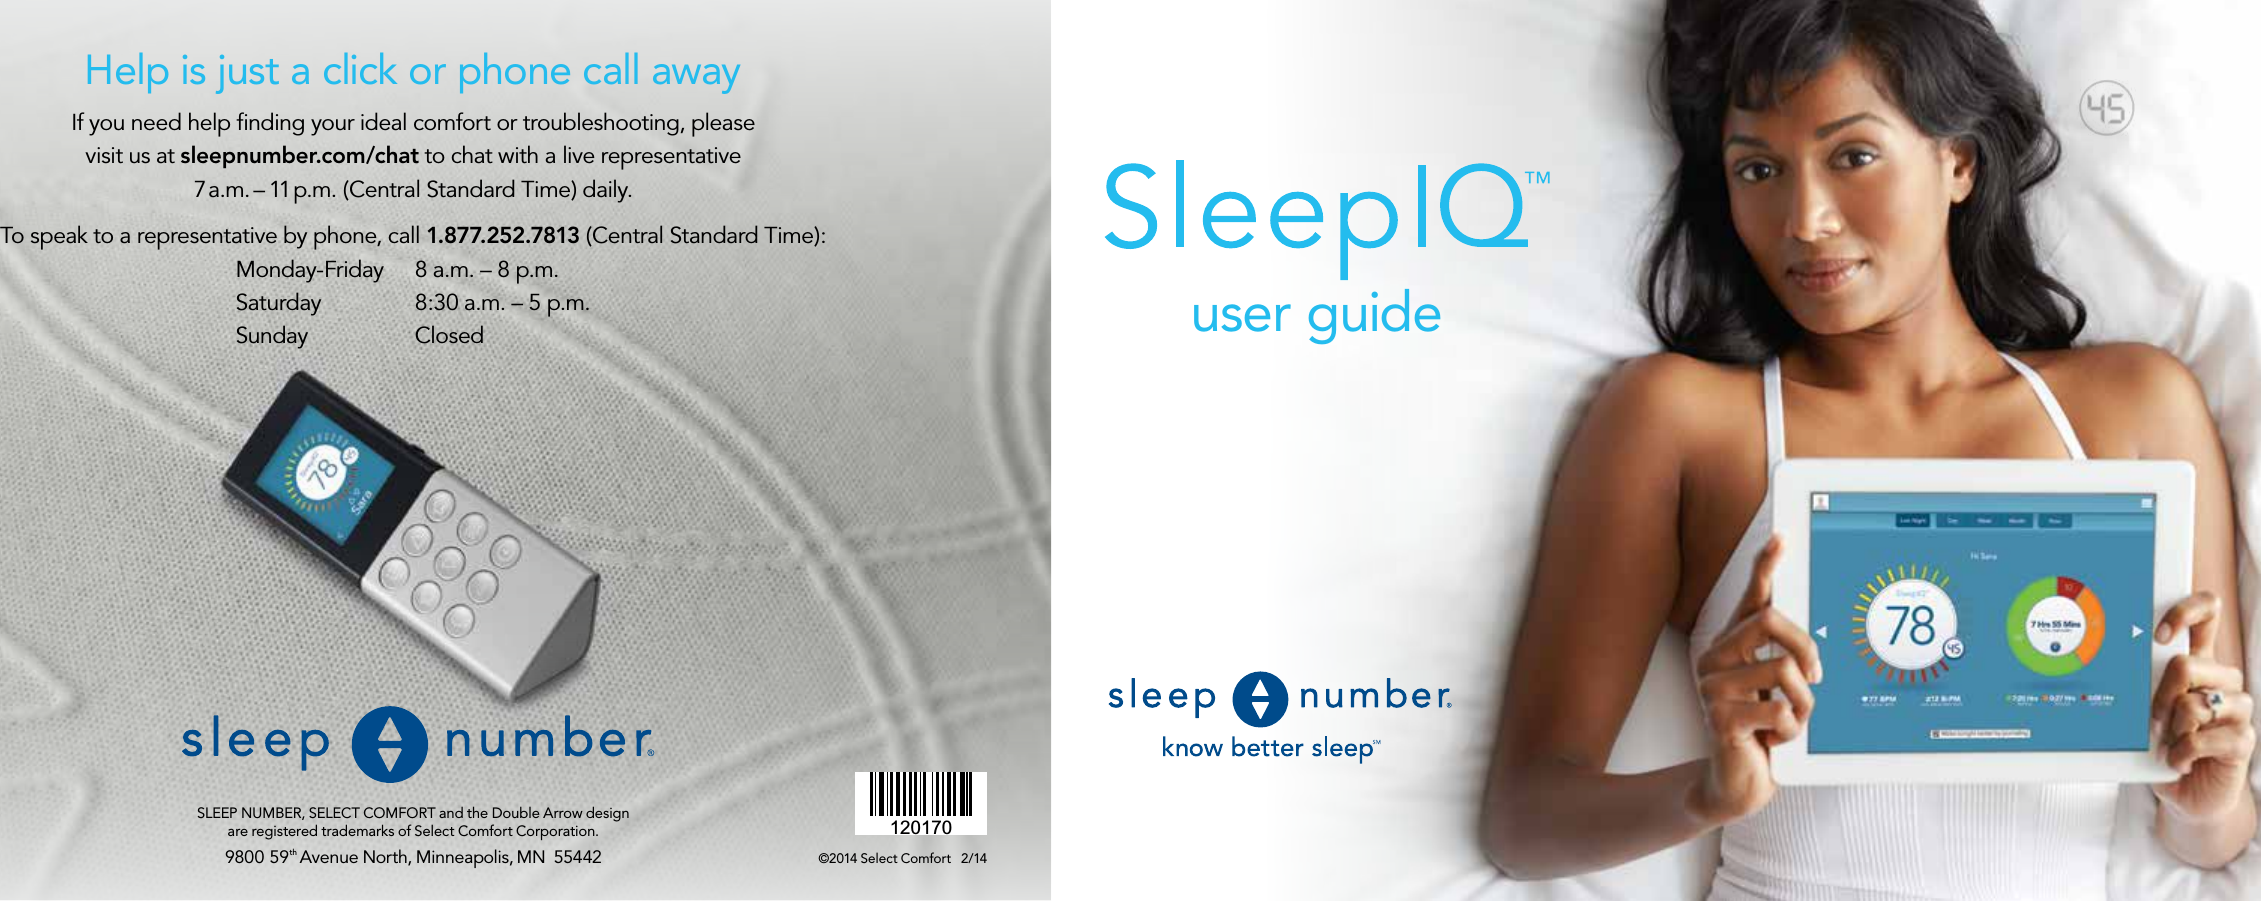 9800 59th Avenue North, Minneapolis, MN  55442SLEEP NUMBER, SELECT COMFORT and the Double Arrow design  are registered trademarks of Select Comfort Corporation.120170user guide©2014 Select Comfort   2/14If you need help ﬁnding your ideal comfort or troubleshooting, please  visit us at sleepnumber.com/chat to chat with a live representative  7 a.m. – 11 p.m. (Central Standard Time) daily.To speak to a representative by phone, call 1.877.252.7813 (Central Standard Time):  Monday-Friday  8 a.m. – 8 p.m.  Saturday  8:30 a.m. – 5 p.m.  Sunday ClosedHelp is just a click or phone call away